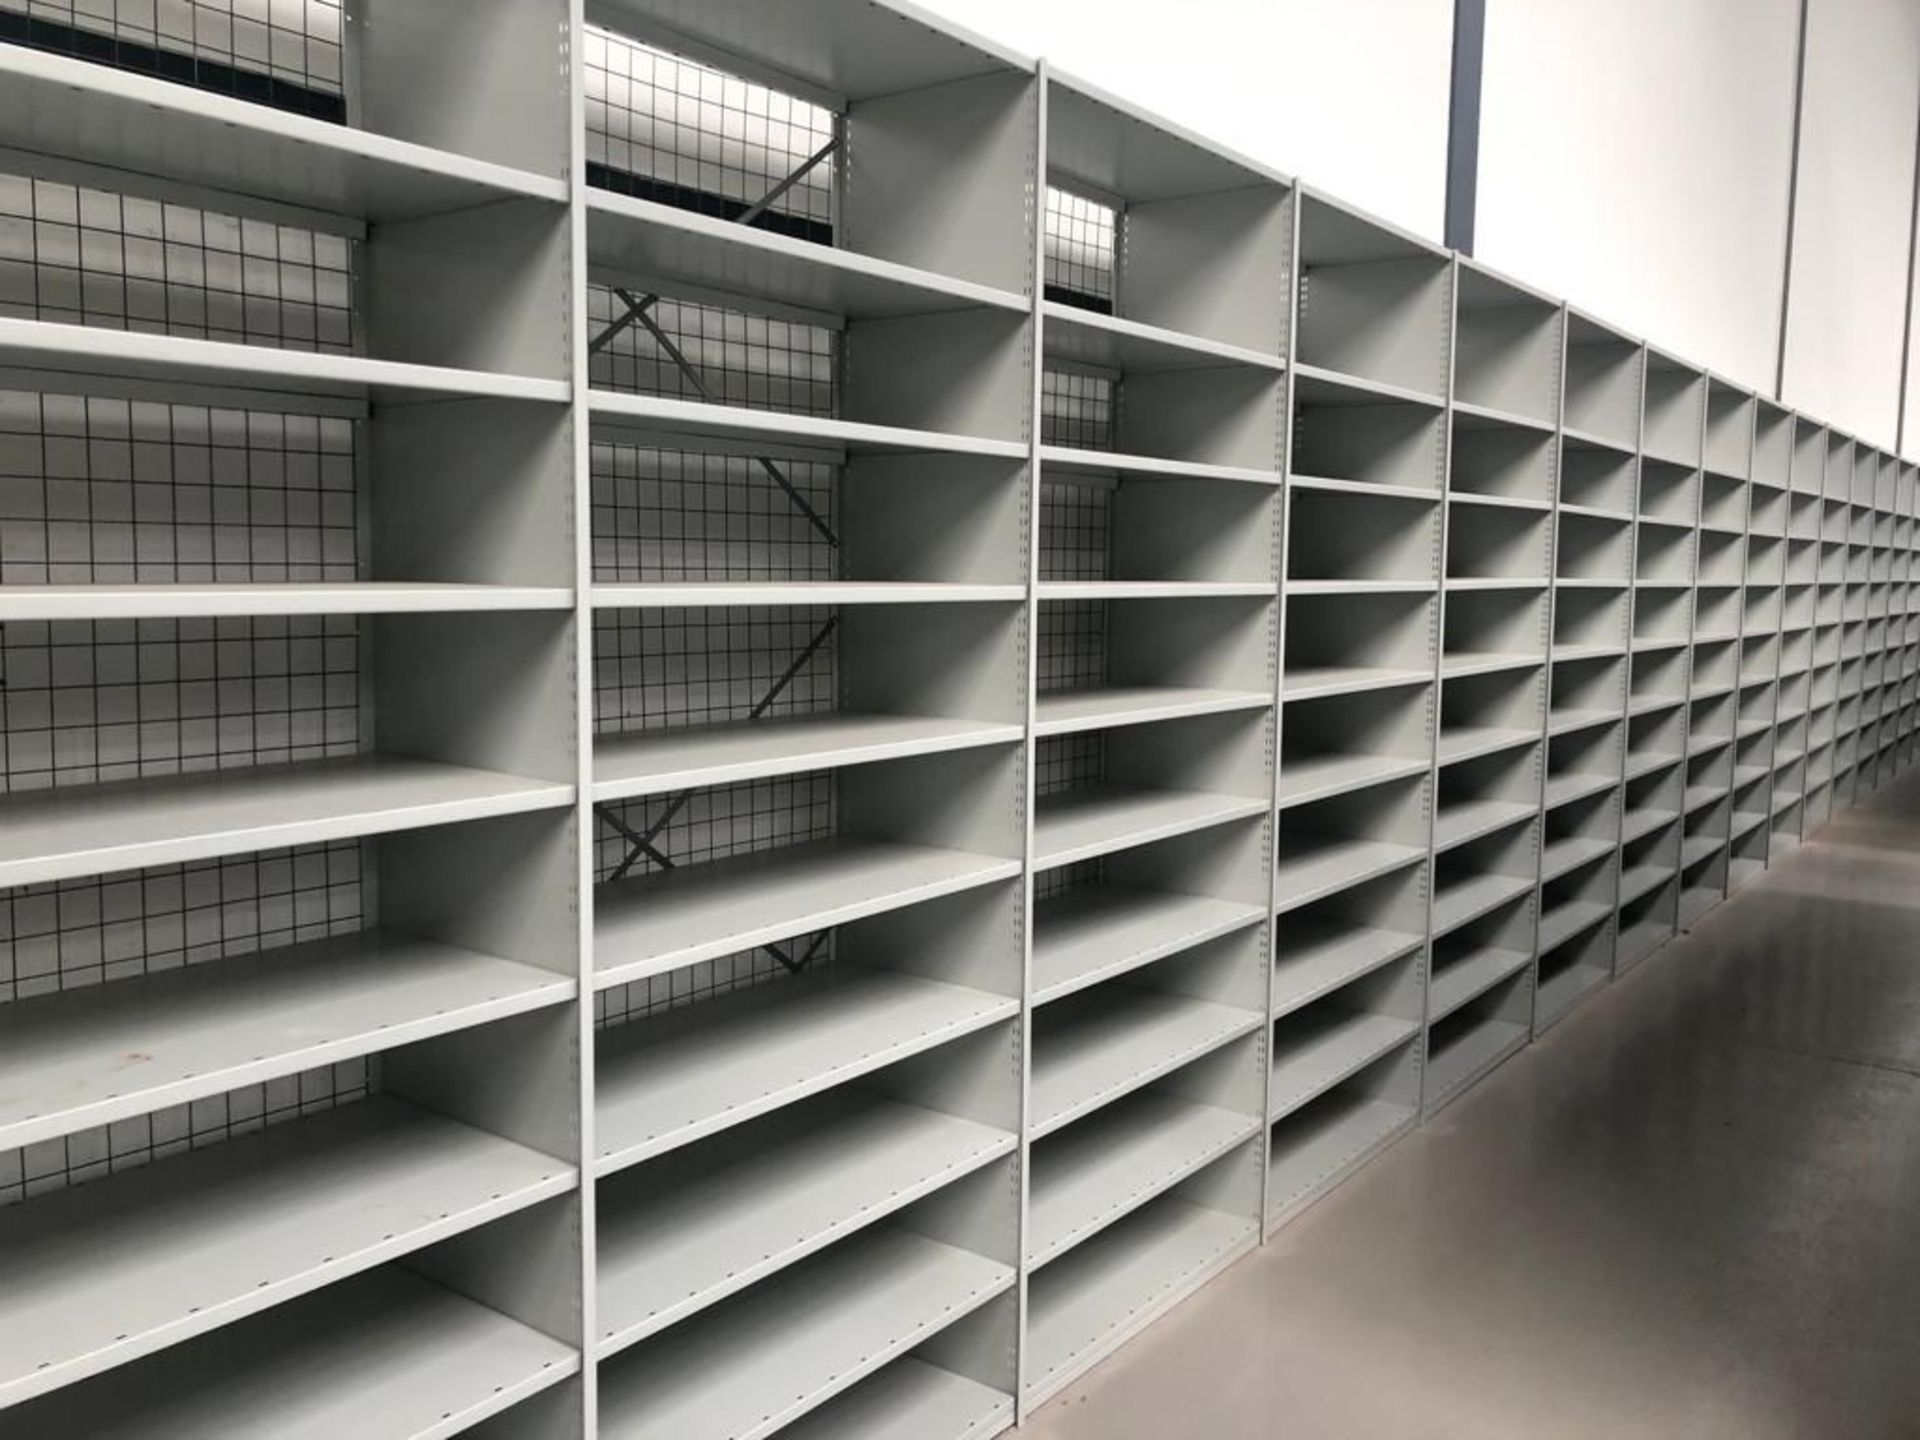 RRP £ 1728 Link Euro Shelving Lot To Contain 6 Bays, 6 Bays Include 7 Uprights@ 2500 High 600Mm - Image 3 of 4